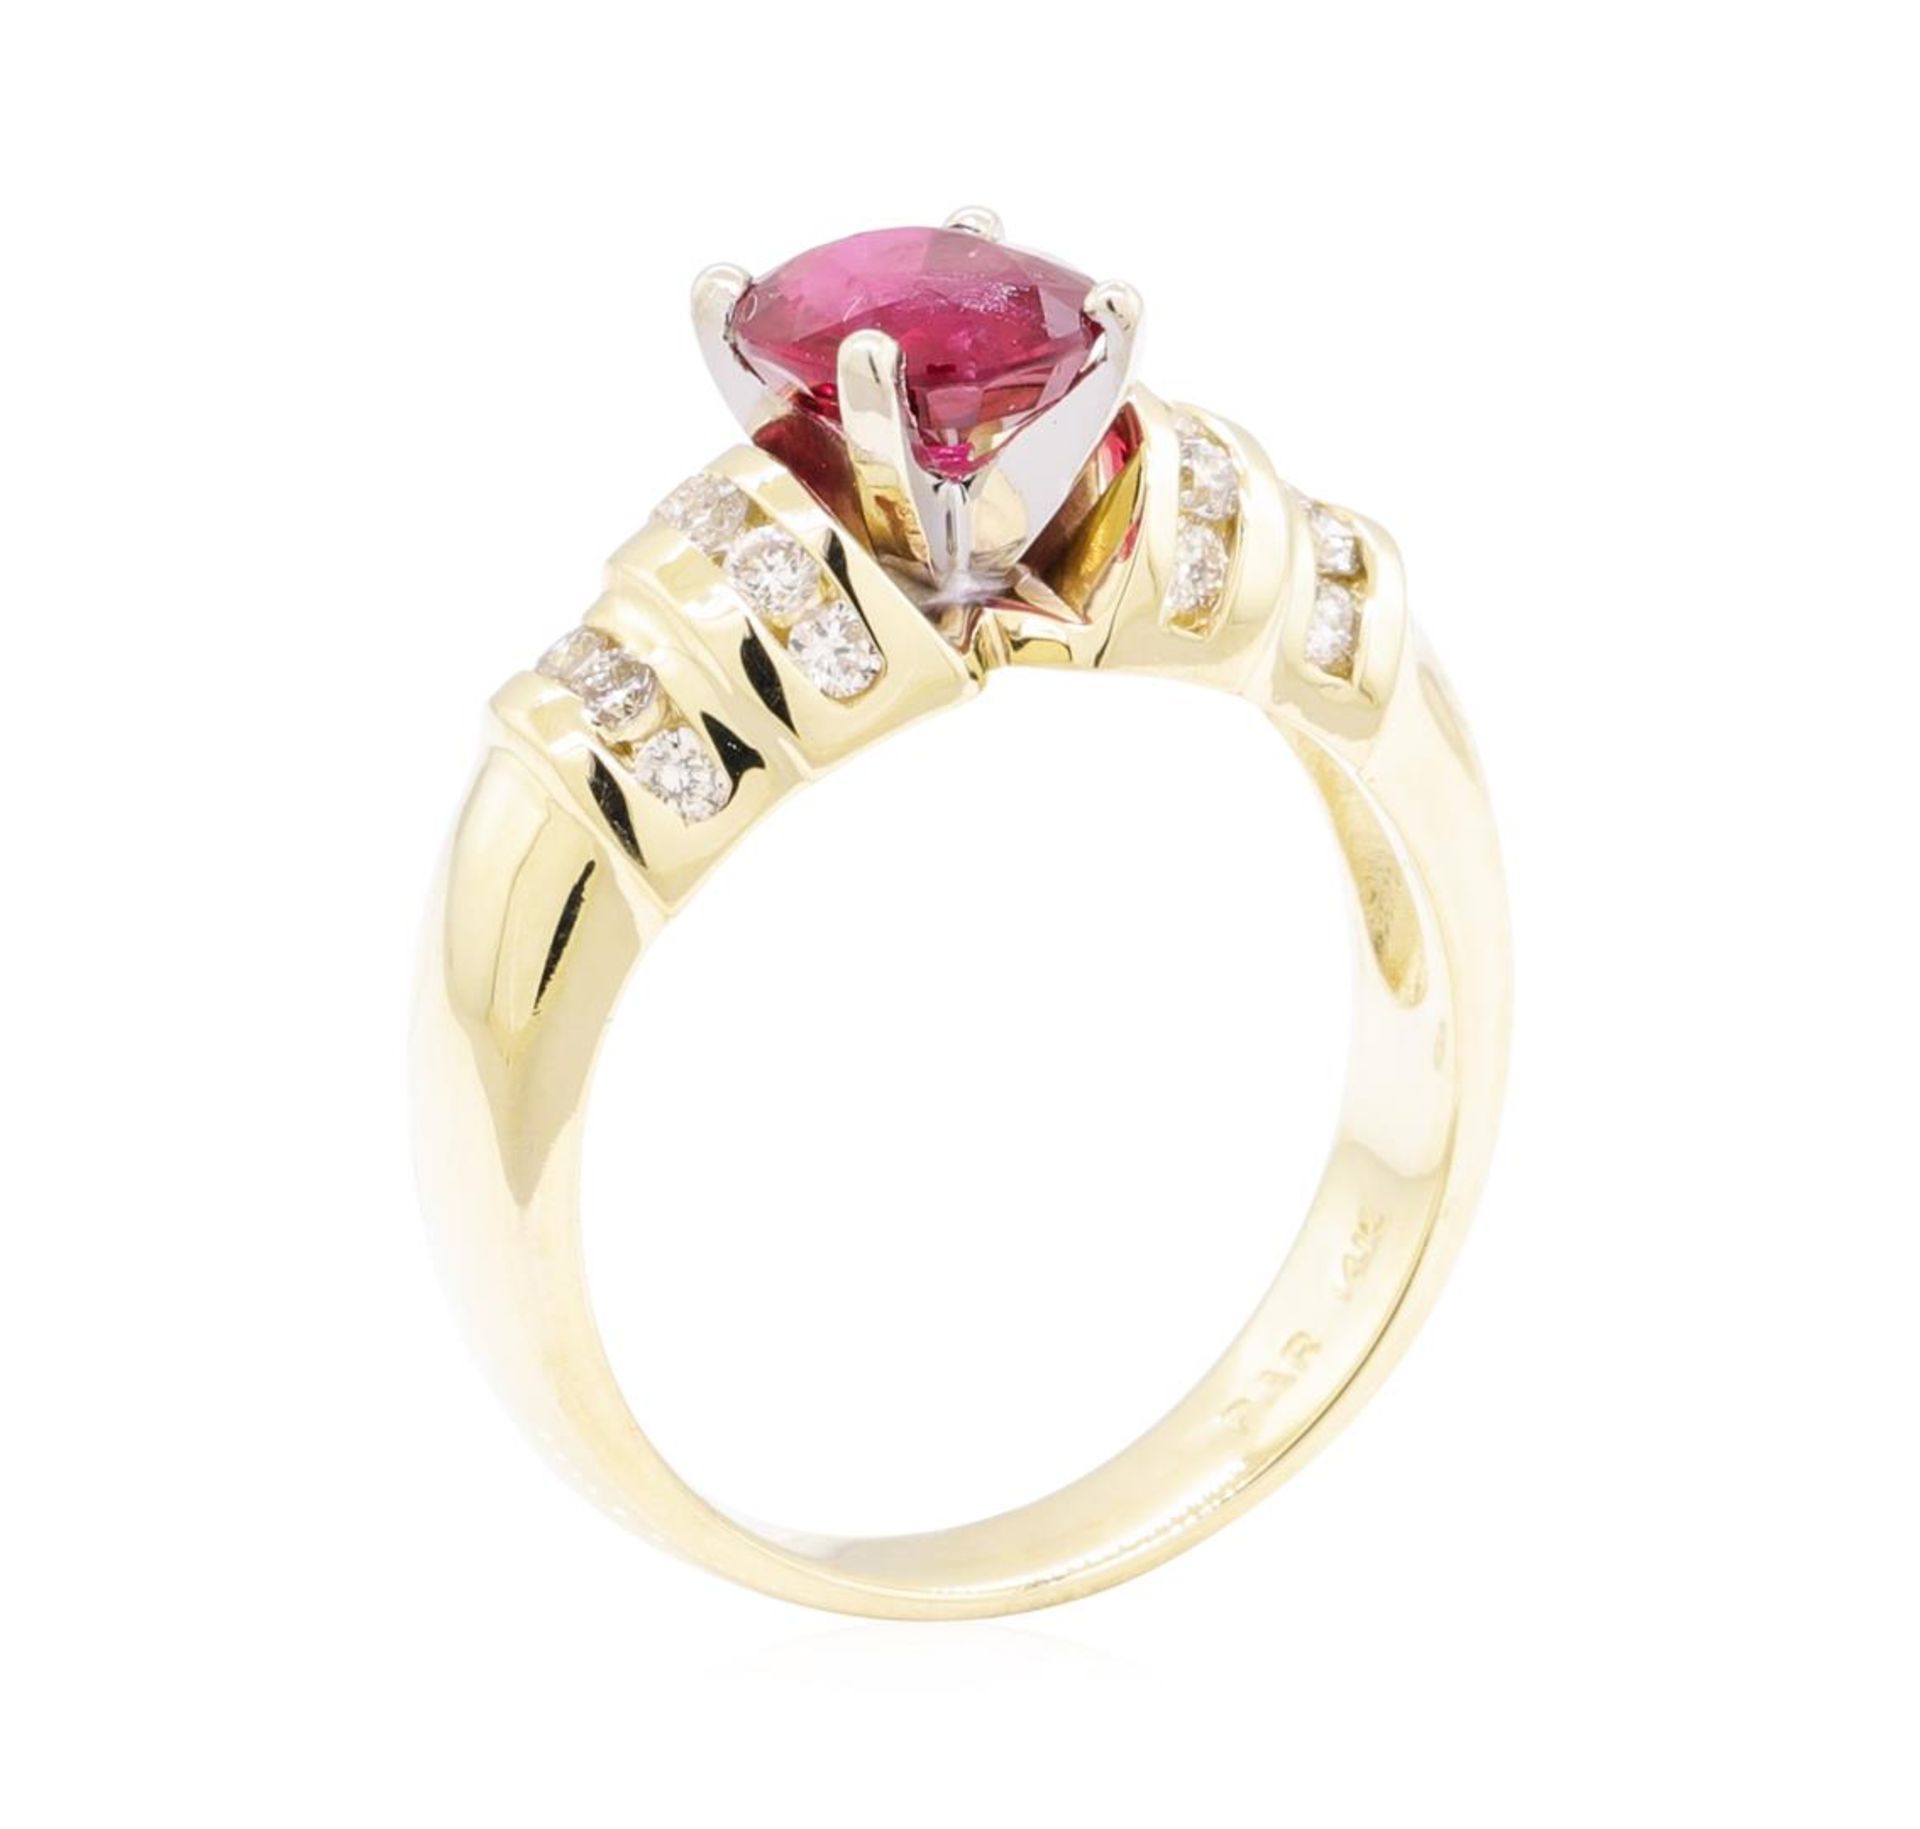 1.67 ctw Ruby And Diamond Ring - 14KT Yellow Gold - Image 8 of 10